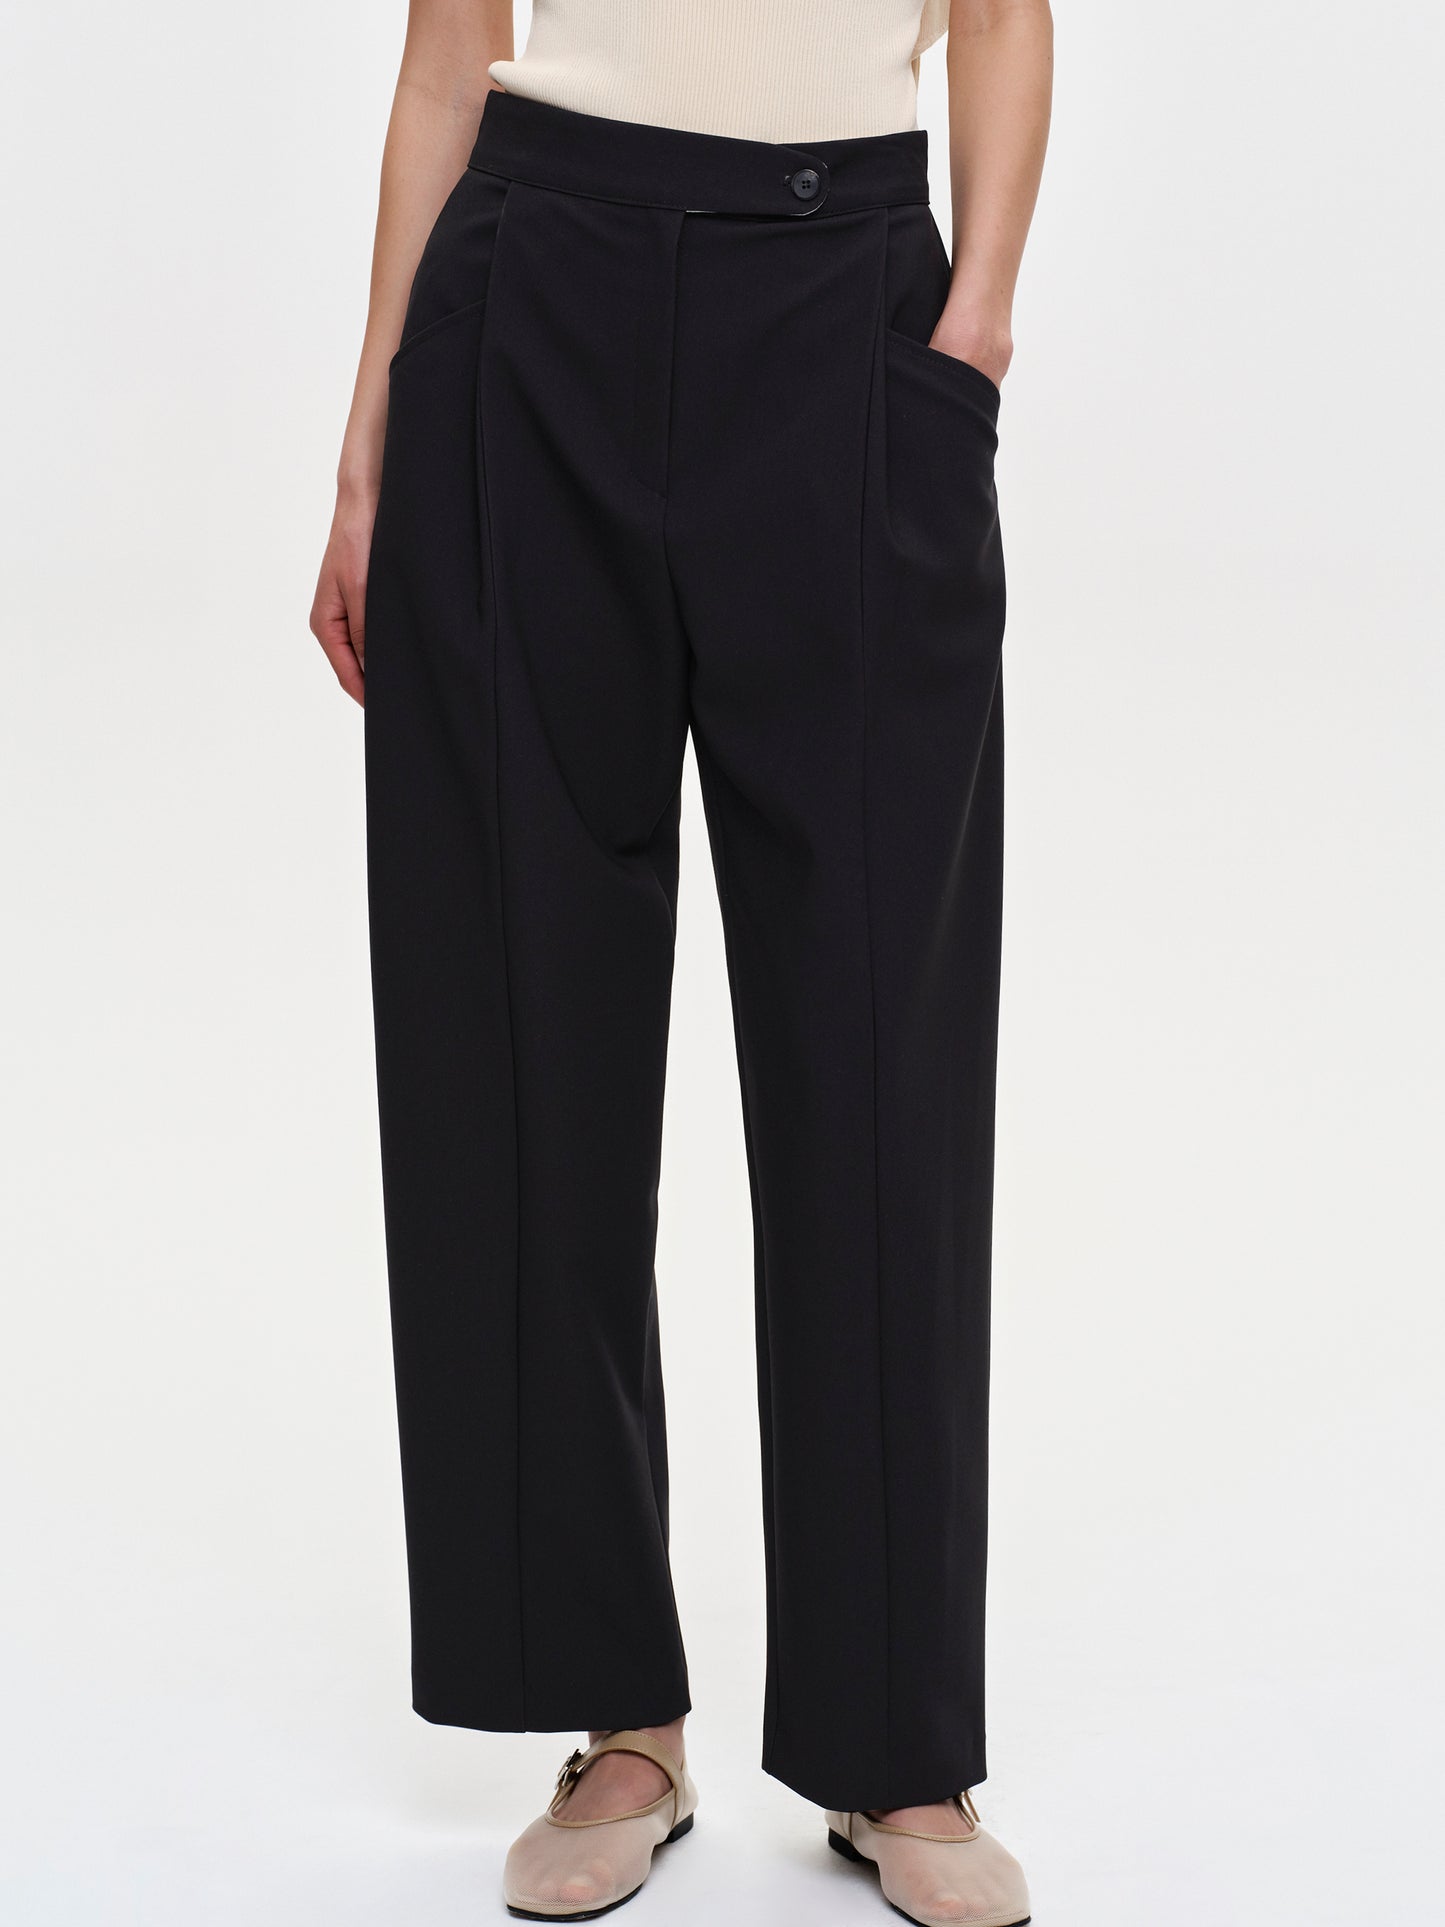 Solid Pocket Trousers, Black